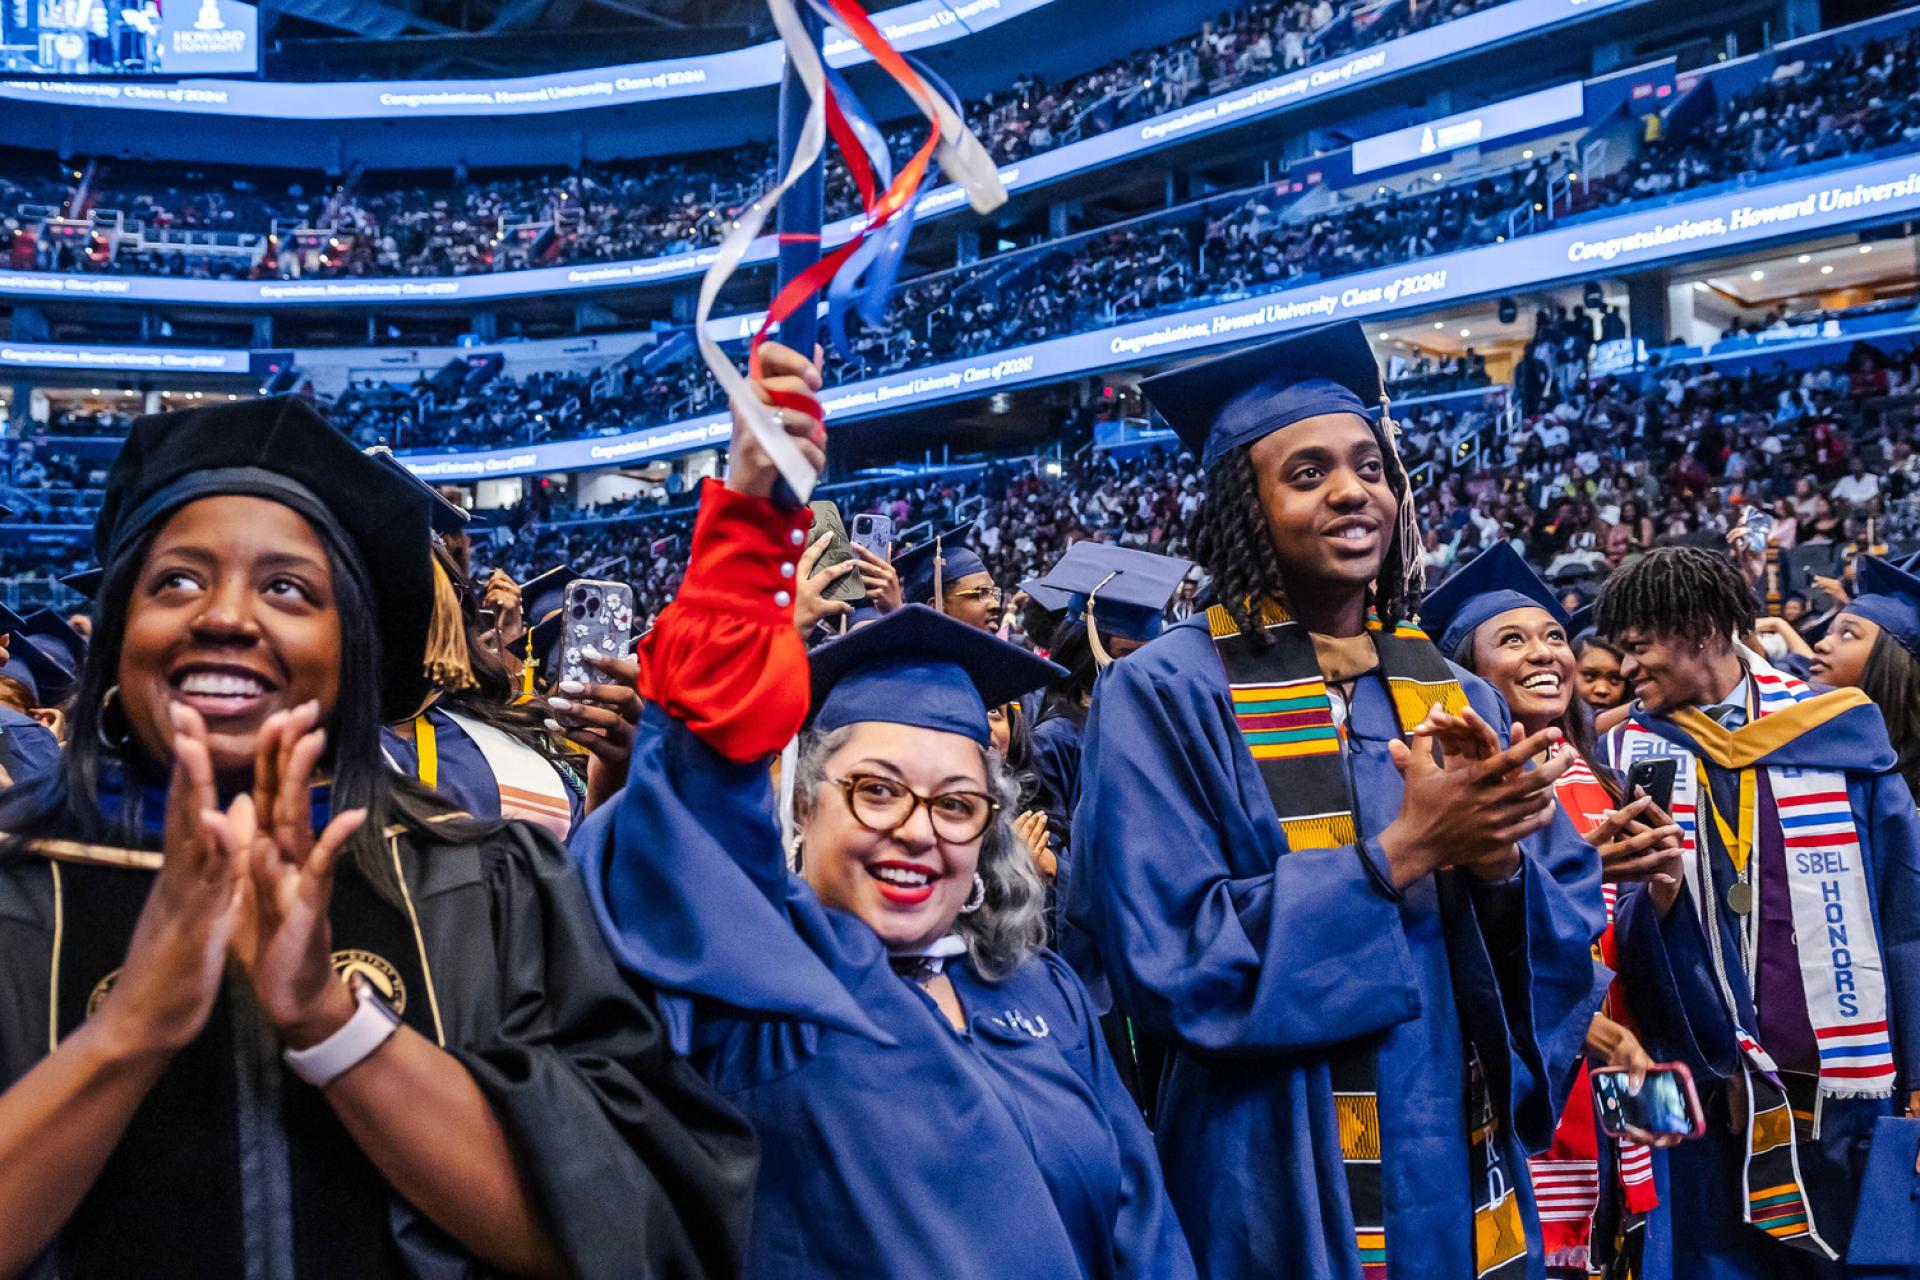 Graduates celebrate the end of the 156th Commencement, officially marking them as degreed alumni of Howard University (Photo by: Latrel Caton)